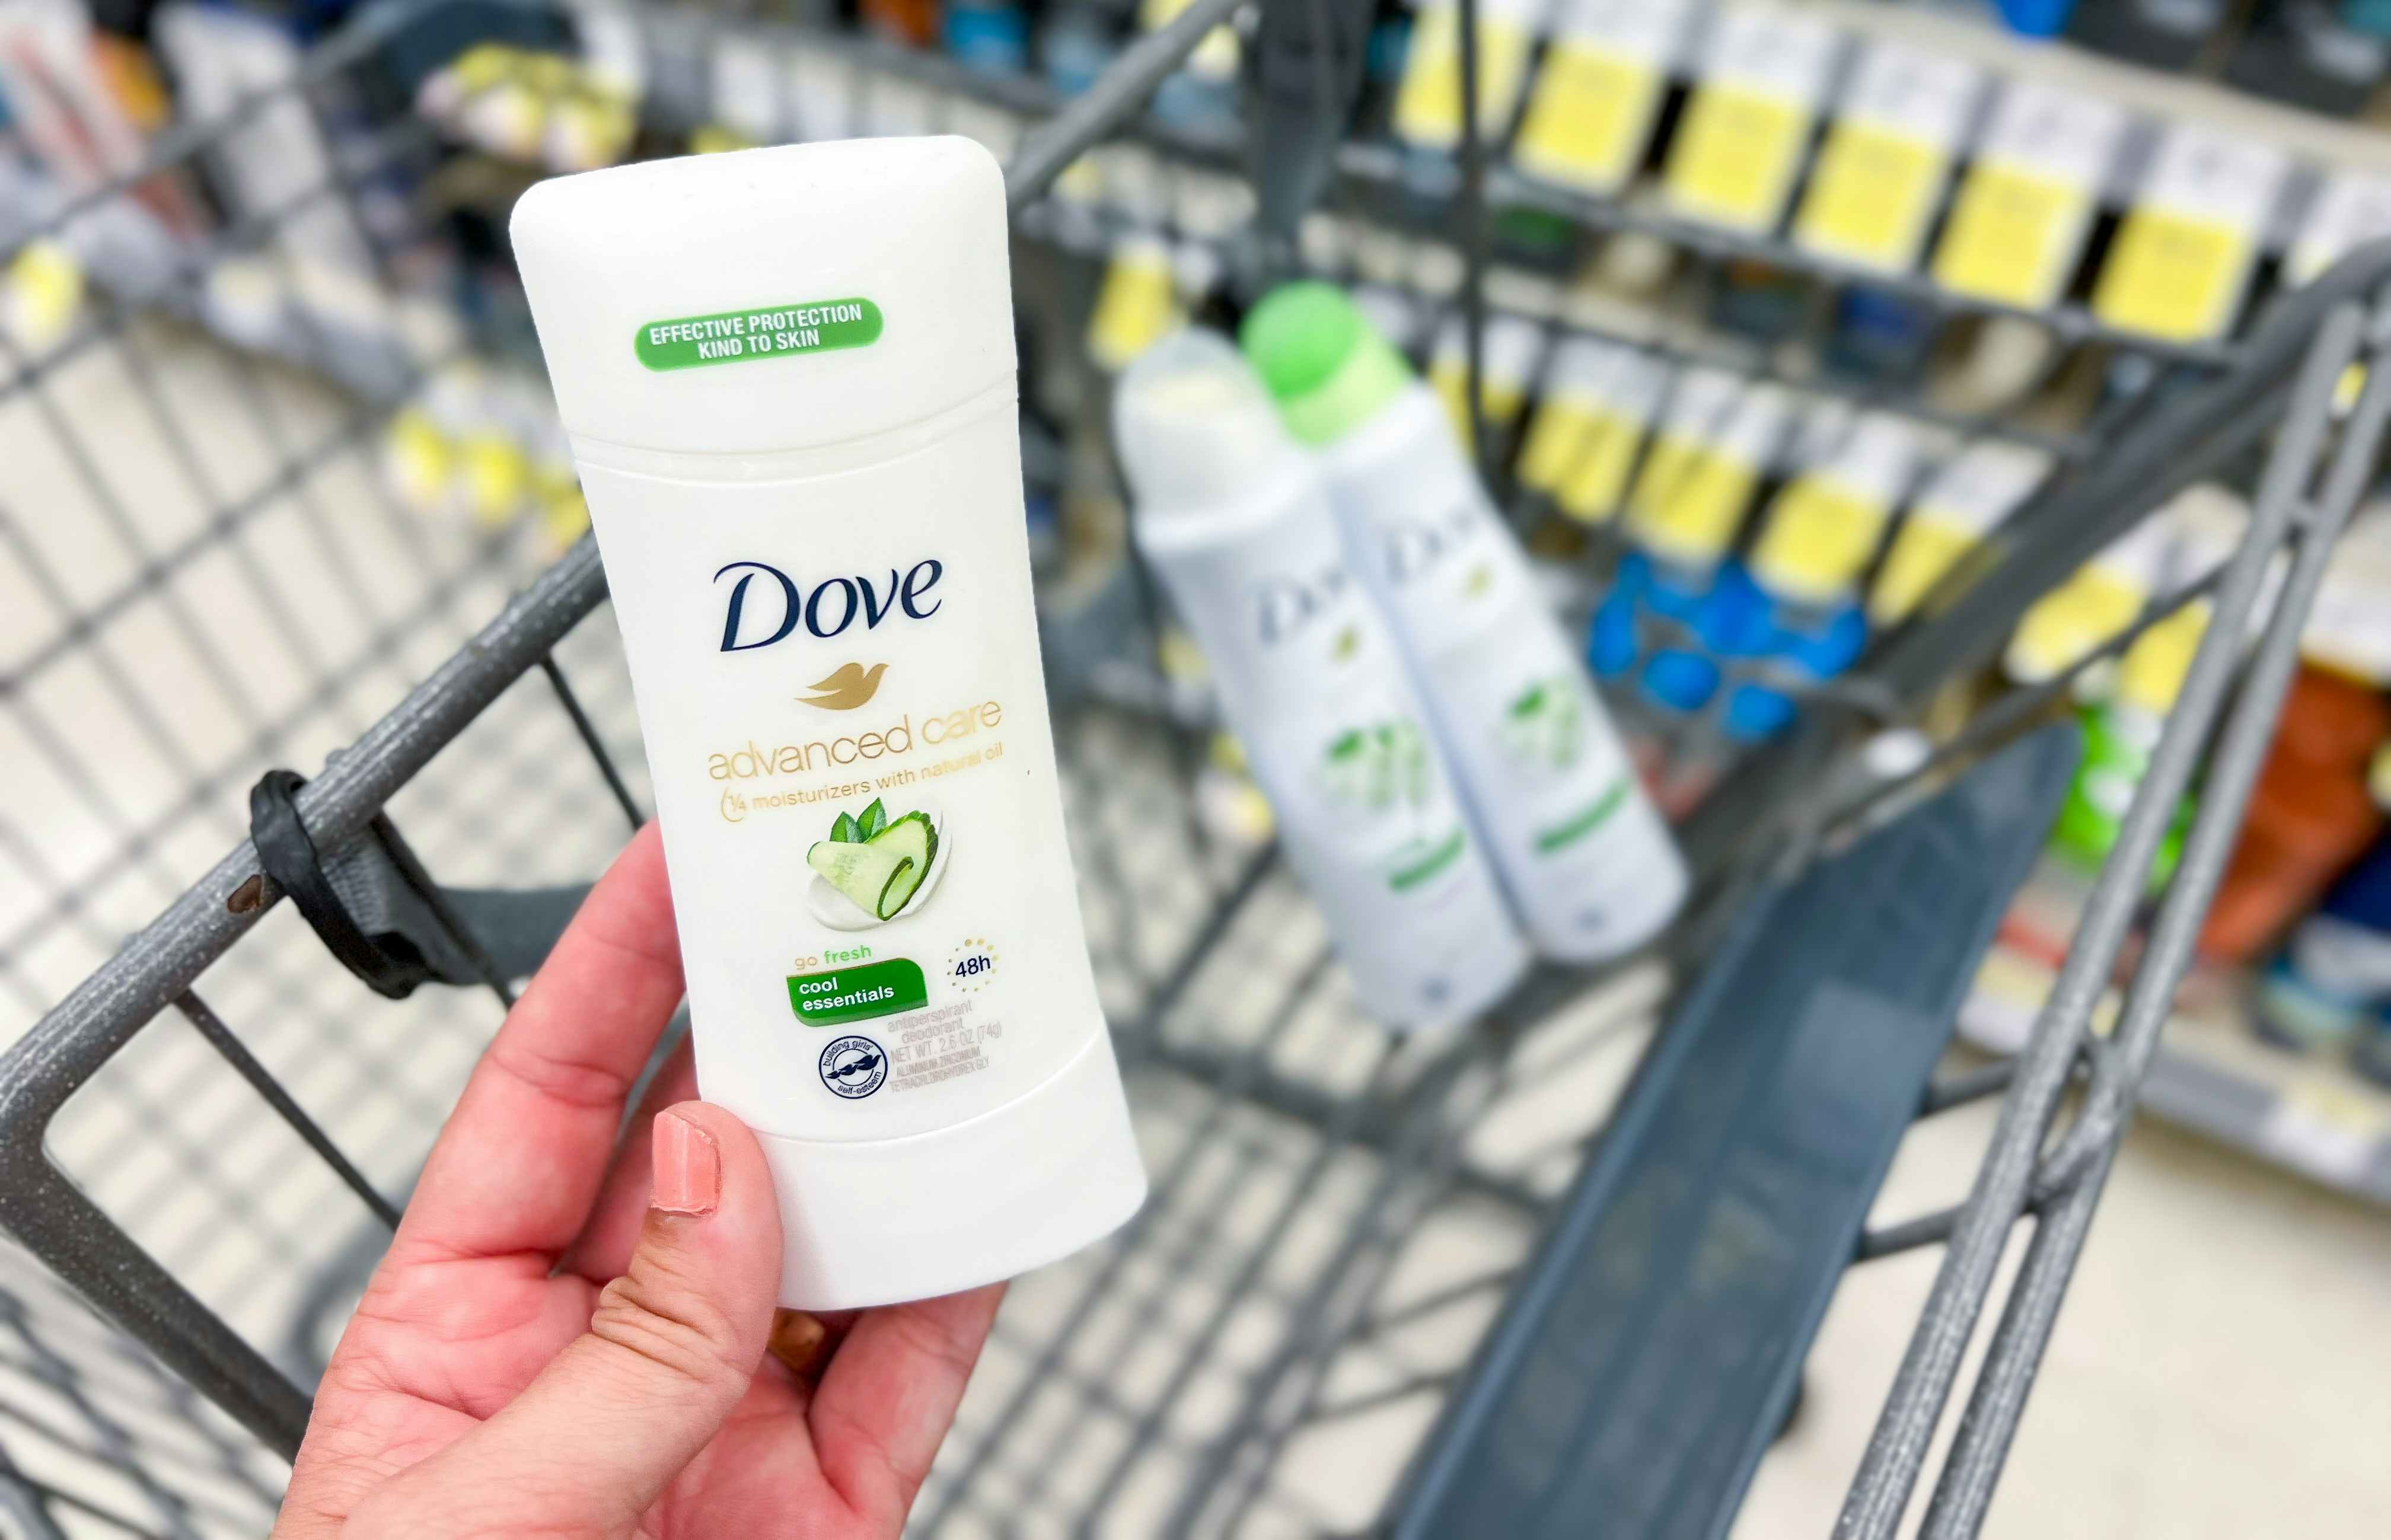 Dove Advanced Care Deodorant: Get 4 Sticks for as Low as $9.52 on Amazon